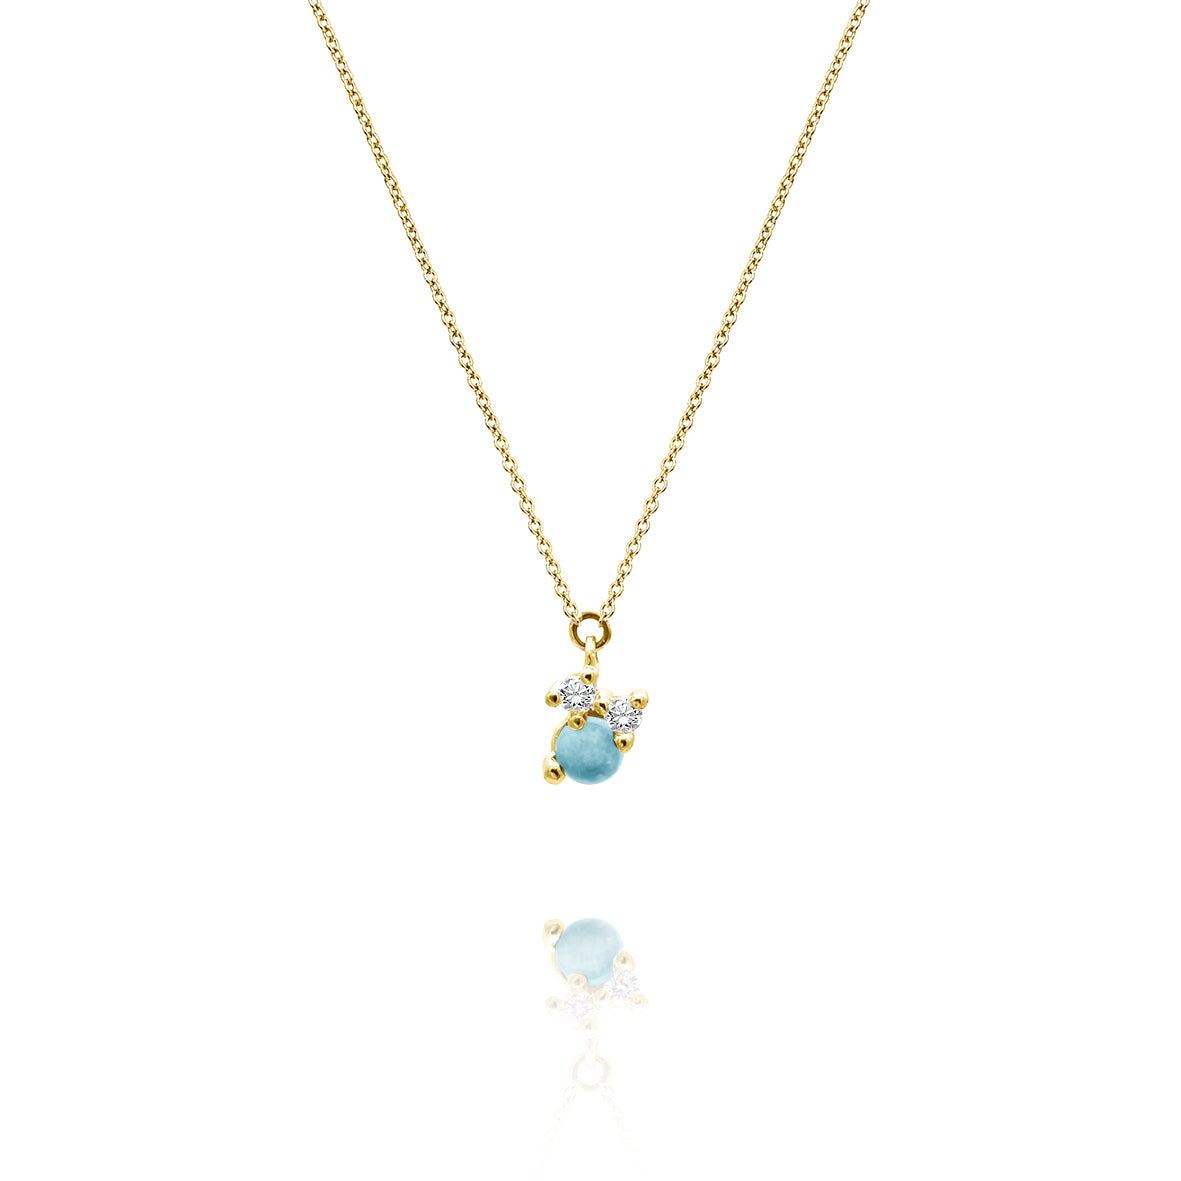 Stellini pendant "smal" in 585/- gold with topaz